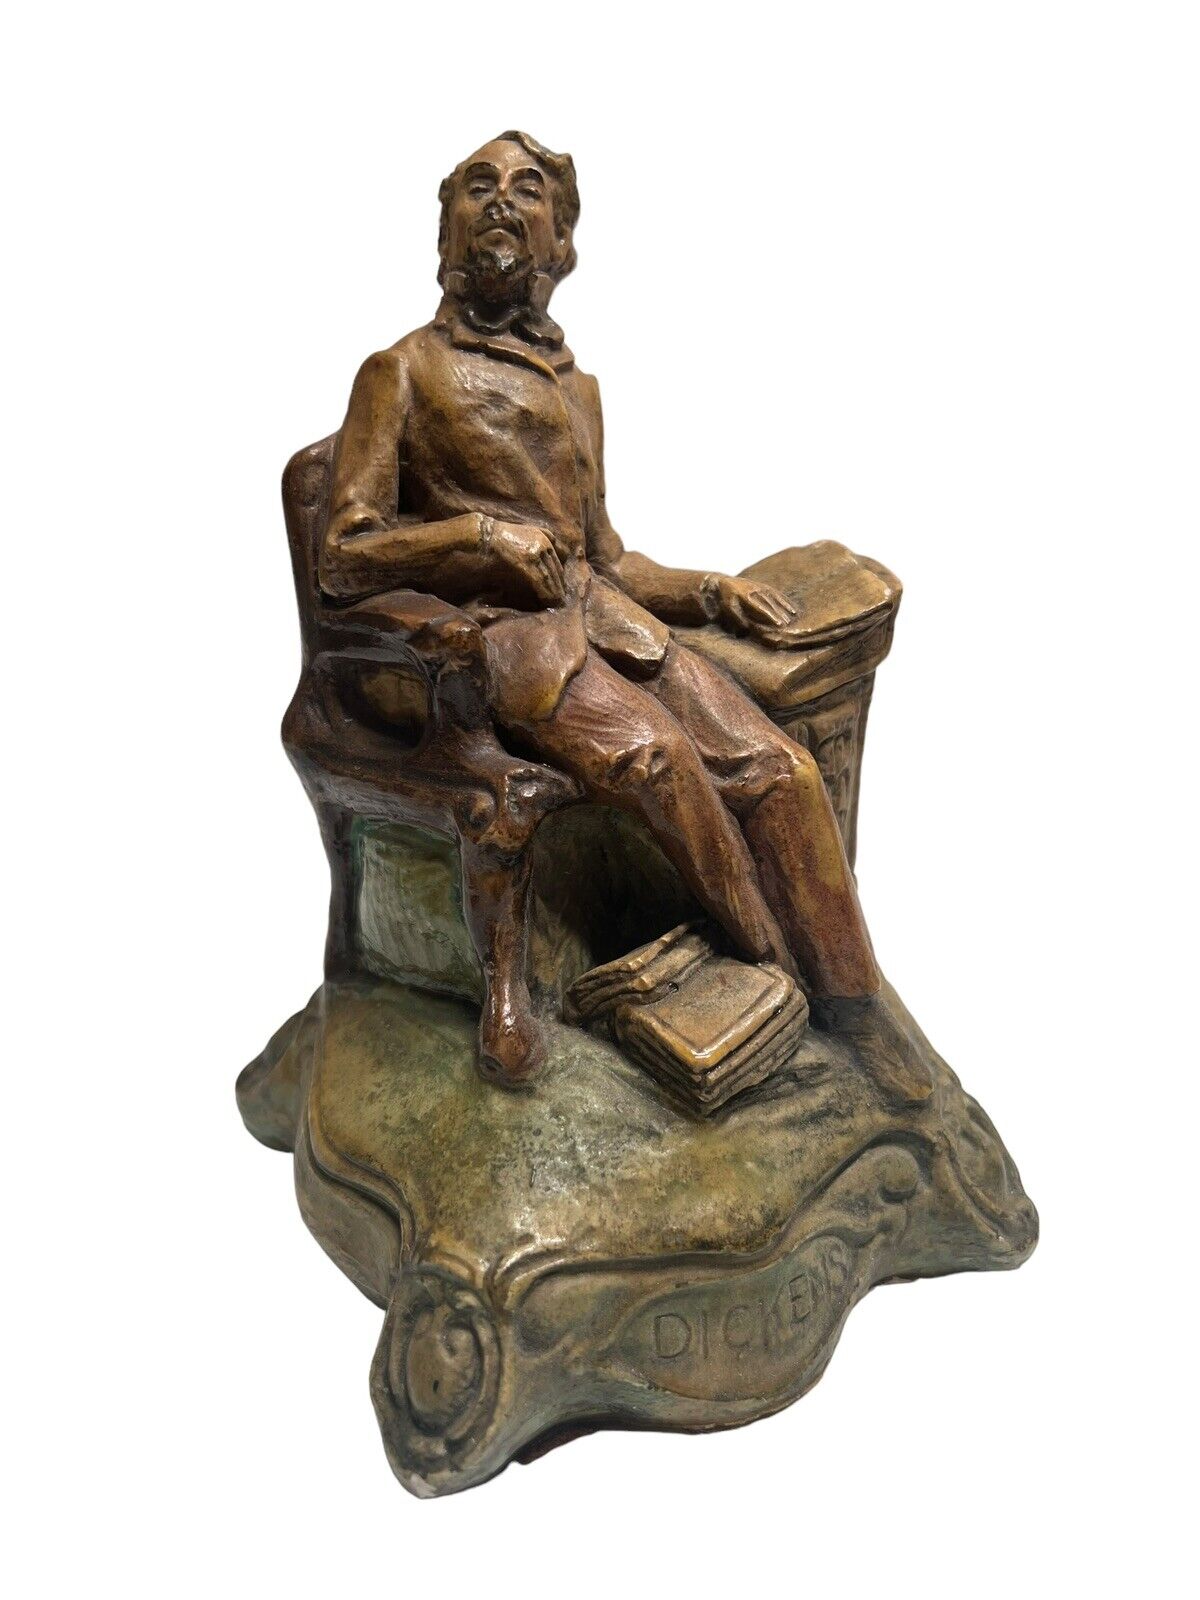 Vintage Charles Dickens In Reading Chair Statue Sculpture Library Bookcase Decor